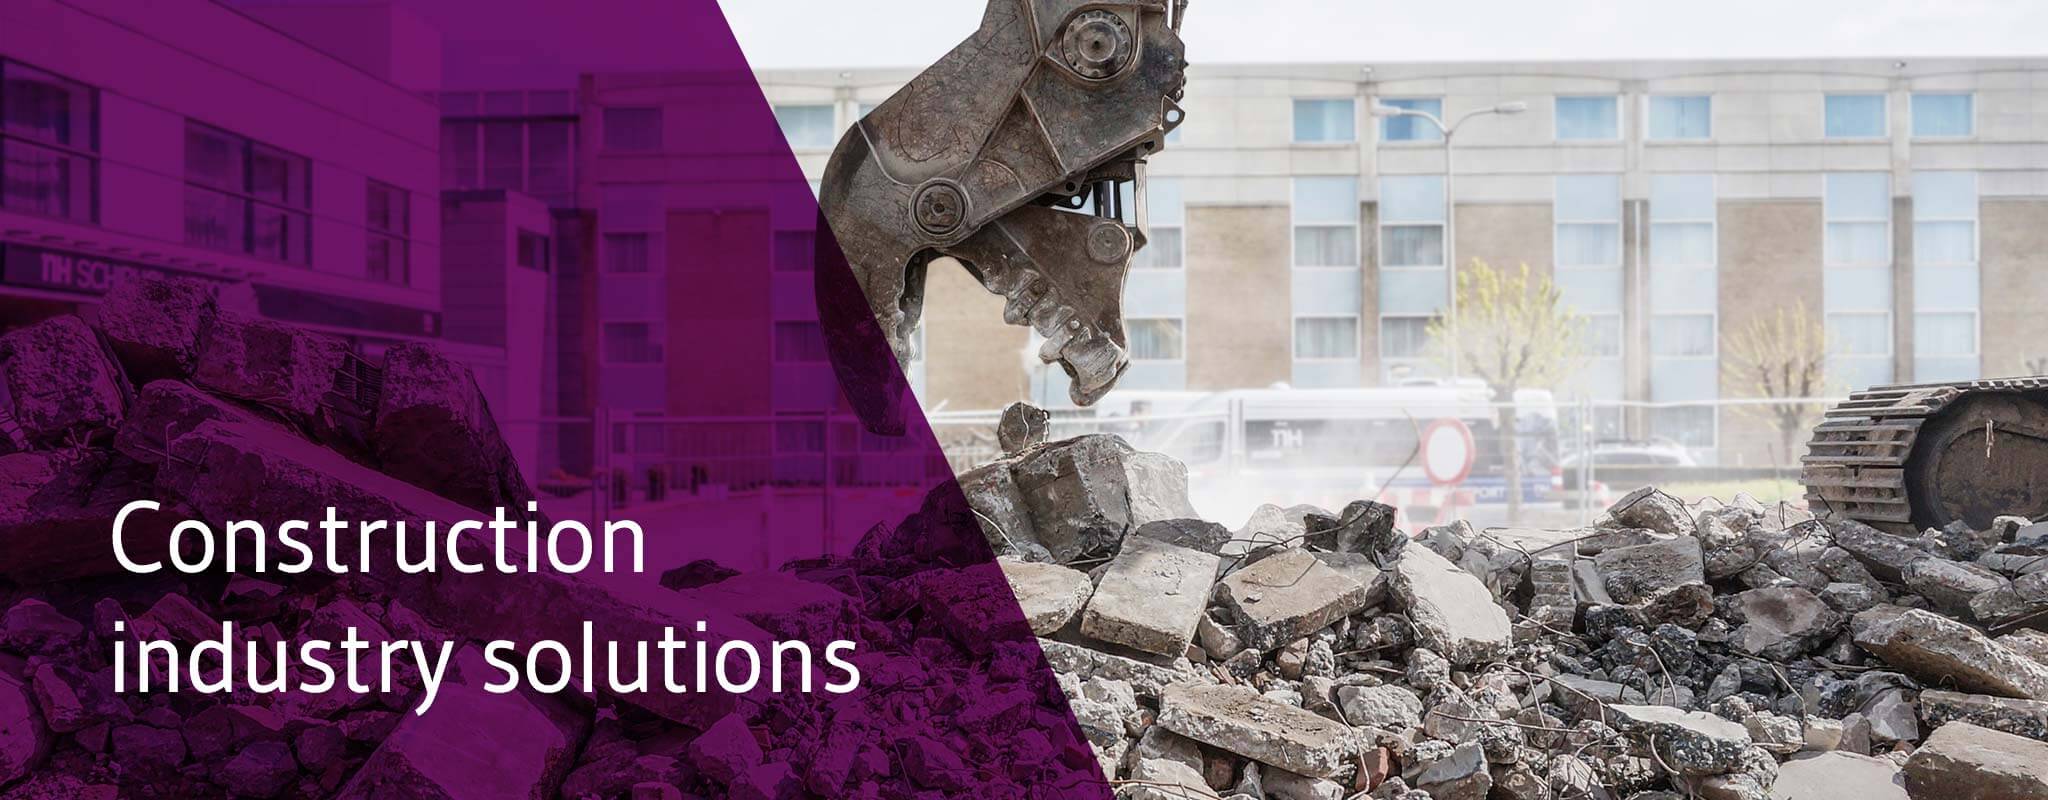 Management, processing, recycling and recovering construction and demolition waste